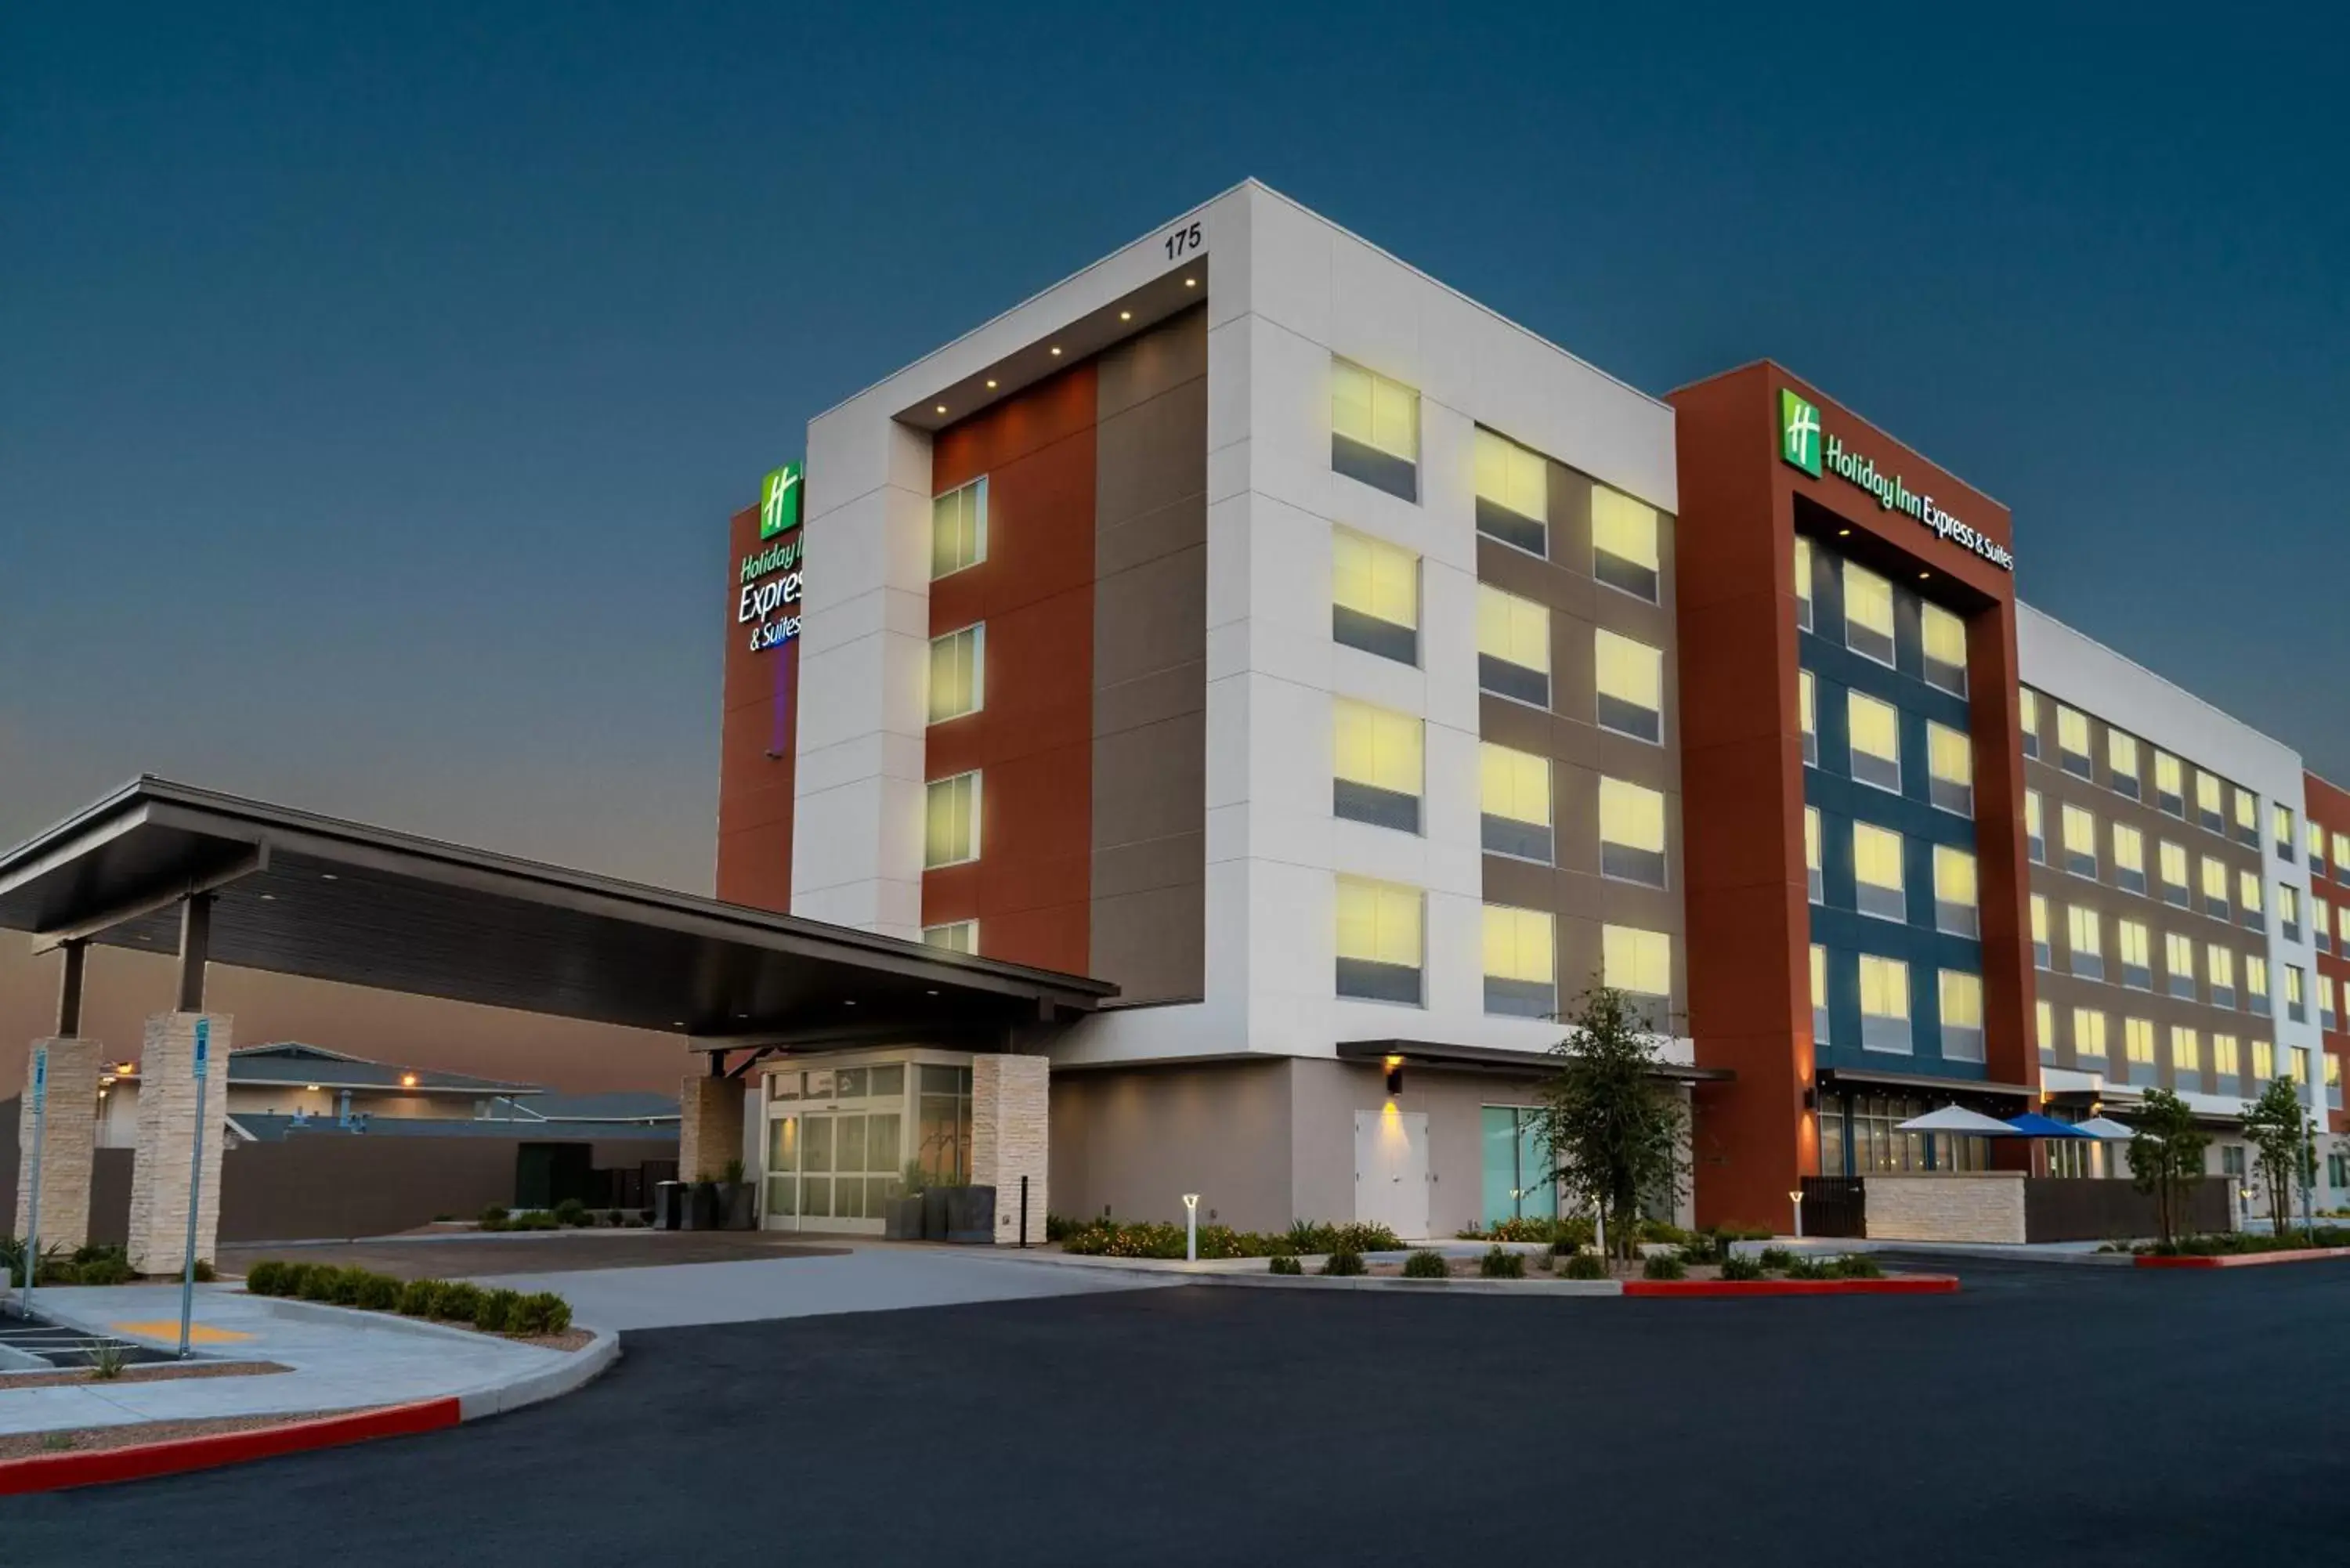 Property building in Holiday Inn Express & Suites - Las Vegas - E Tropicana, an IHG Hotel